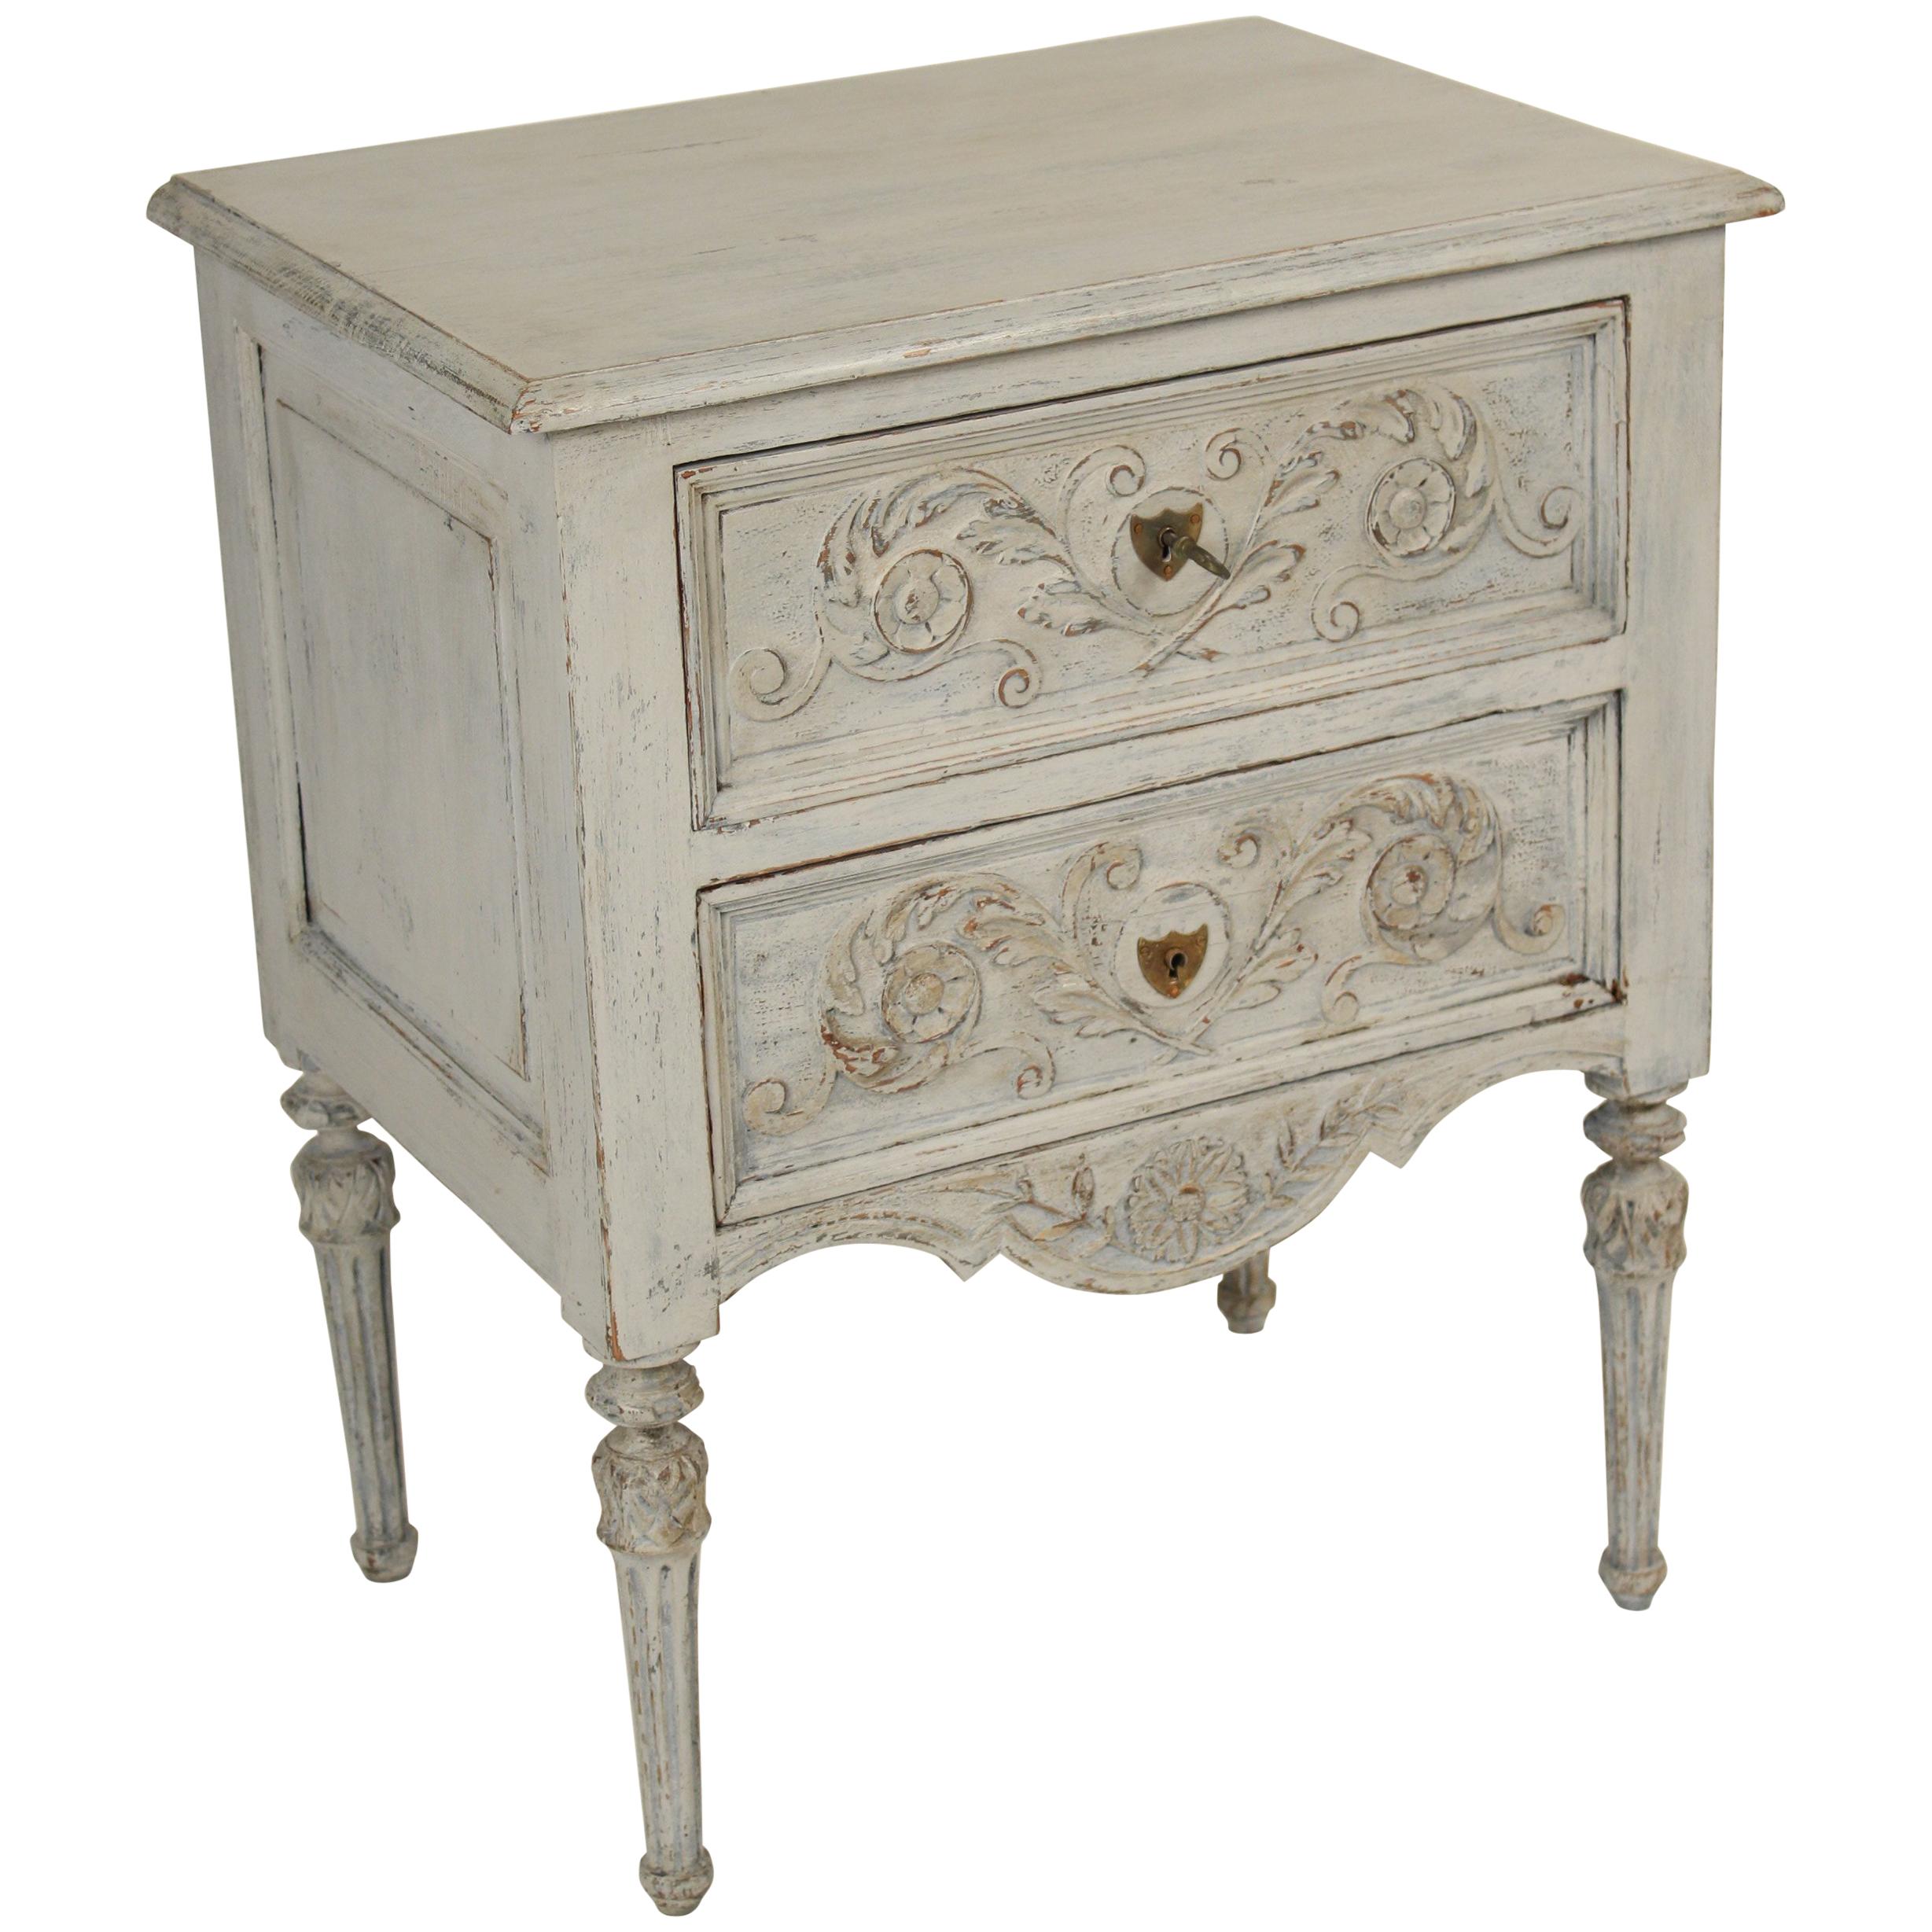 Louis XVI Style Painted Chest of Drawers